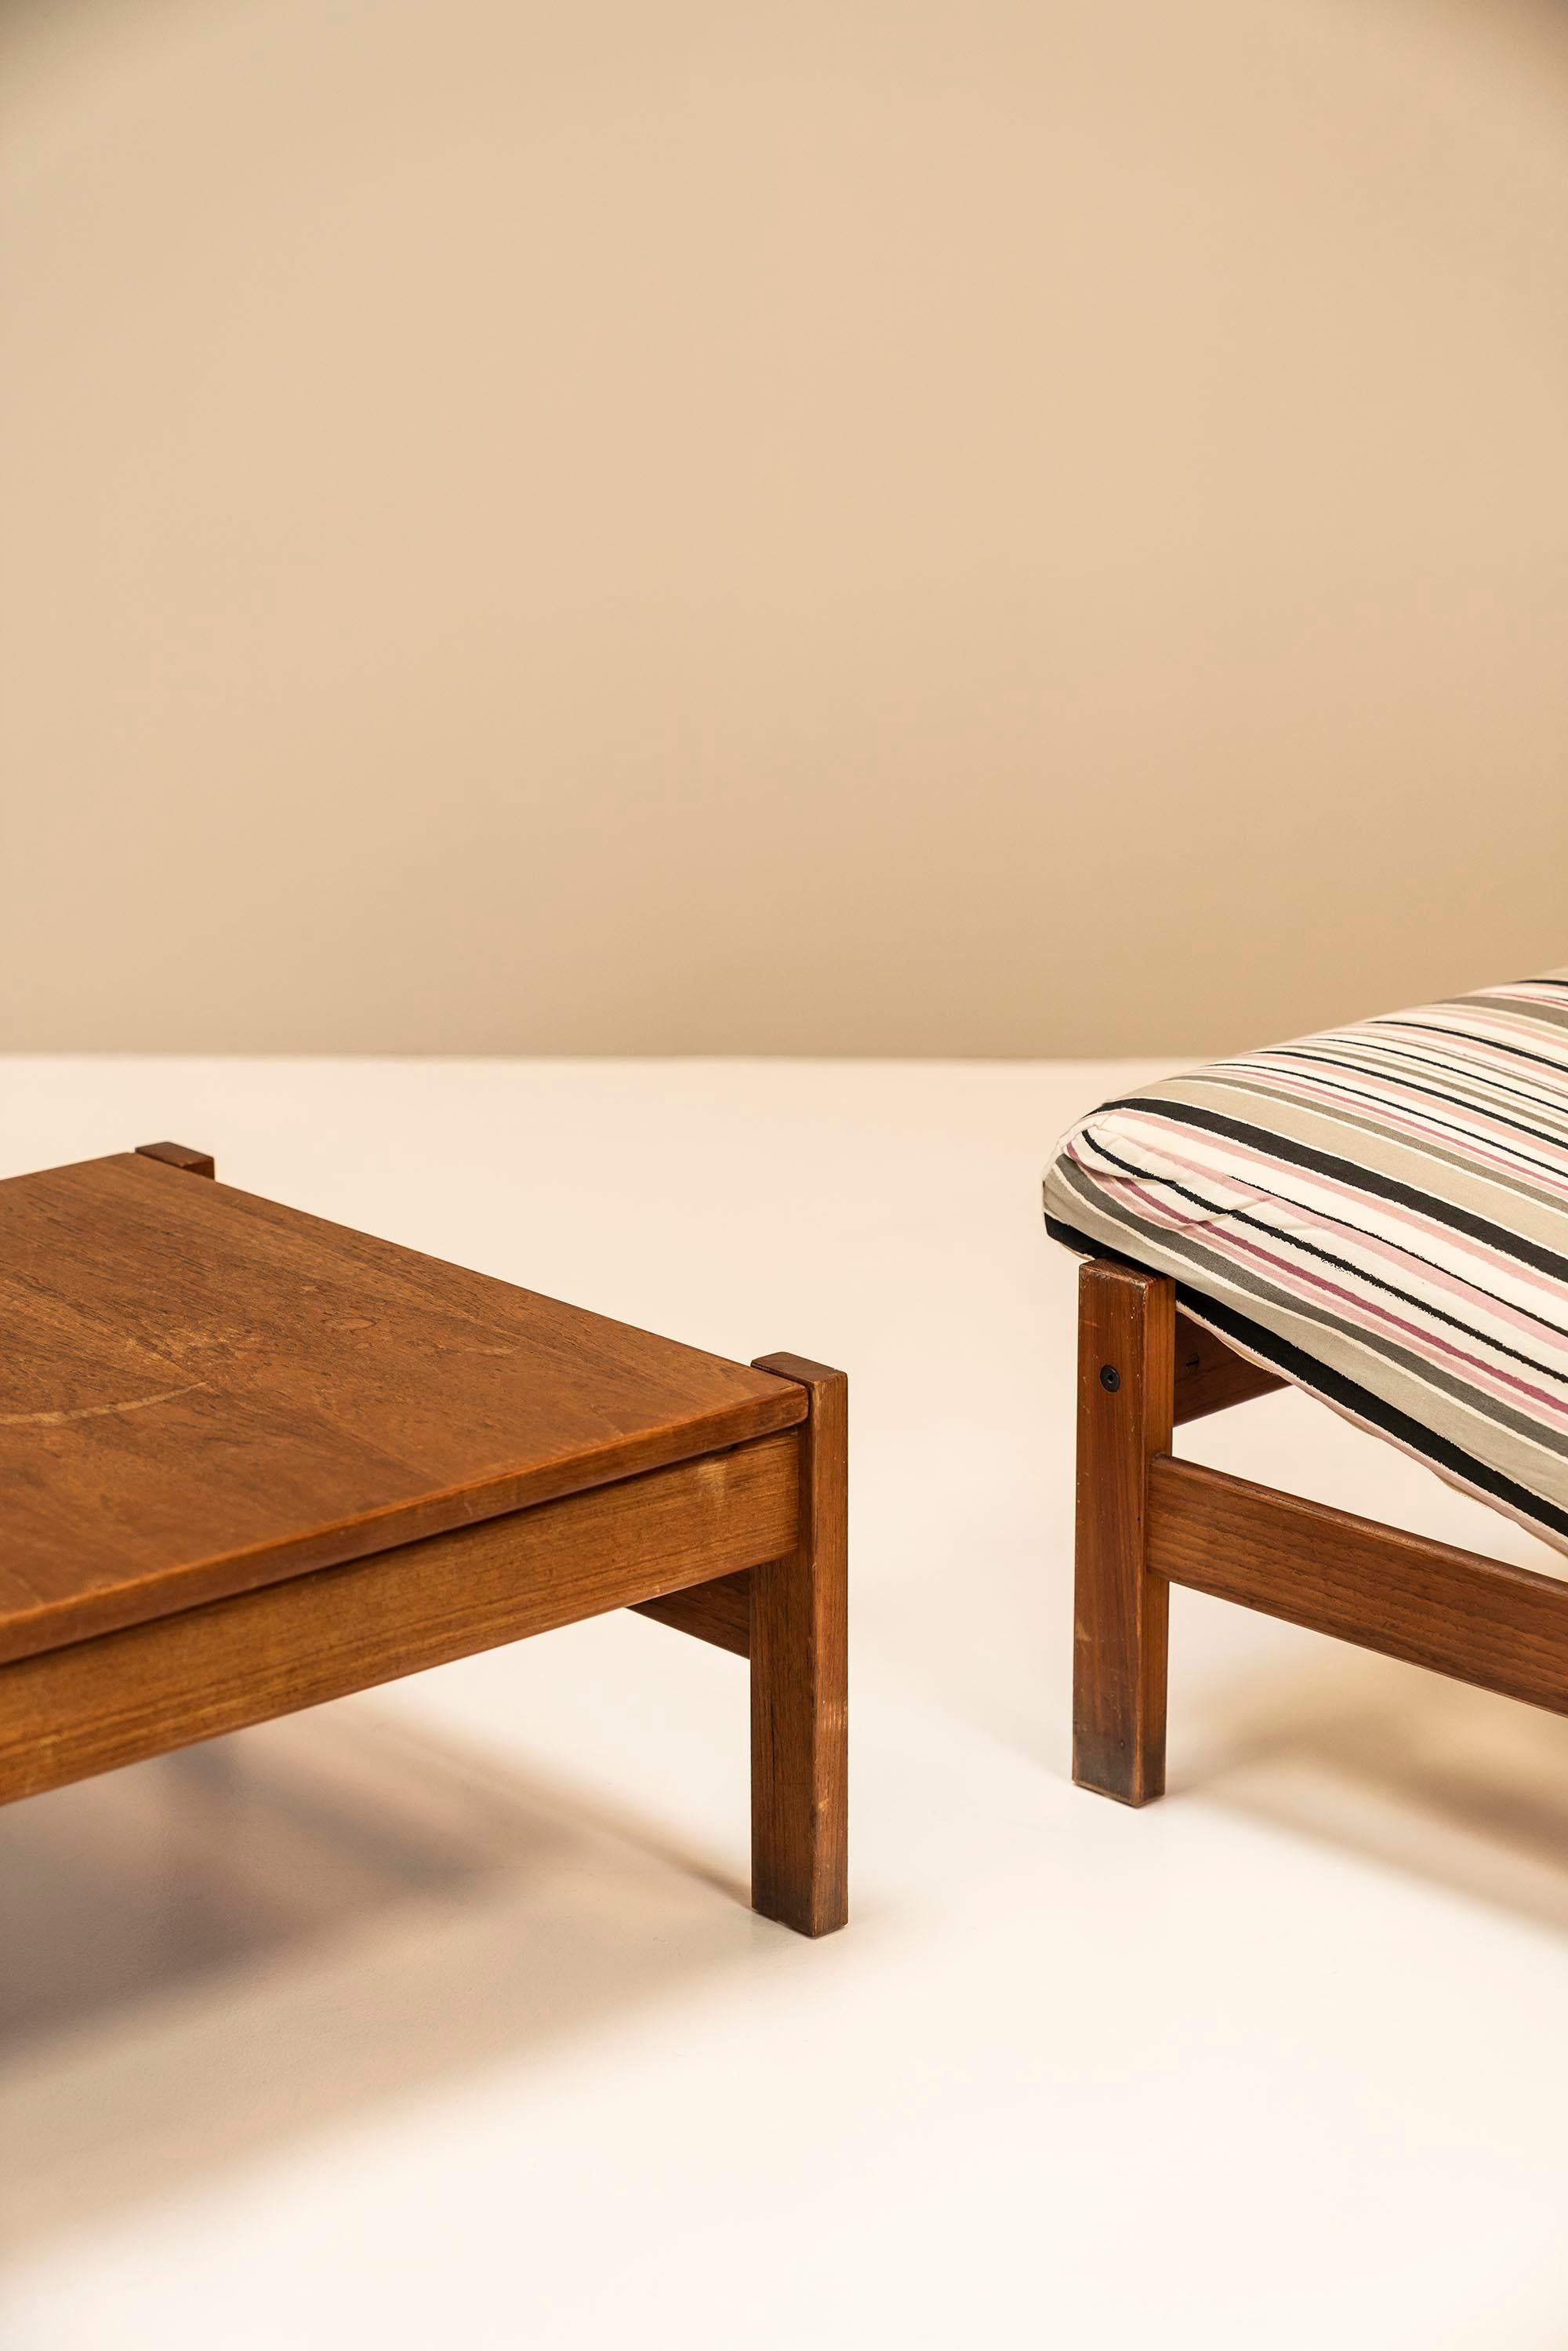 Modular Bench Set in Teak and Original Upholstery, Italy, 1960s For Sale 9